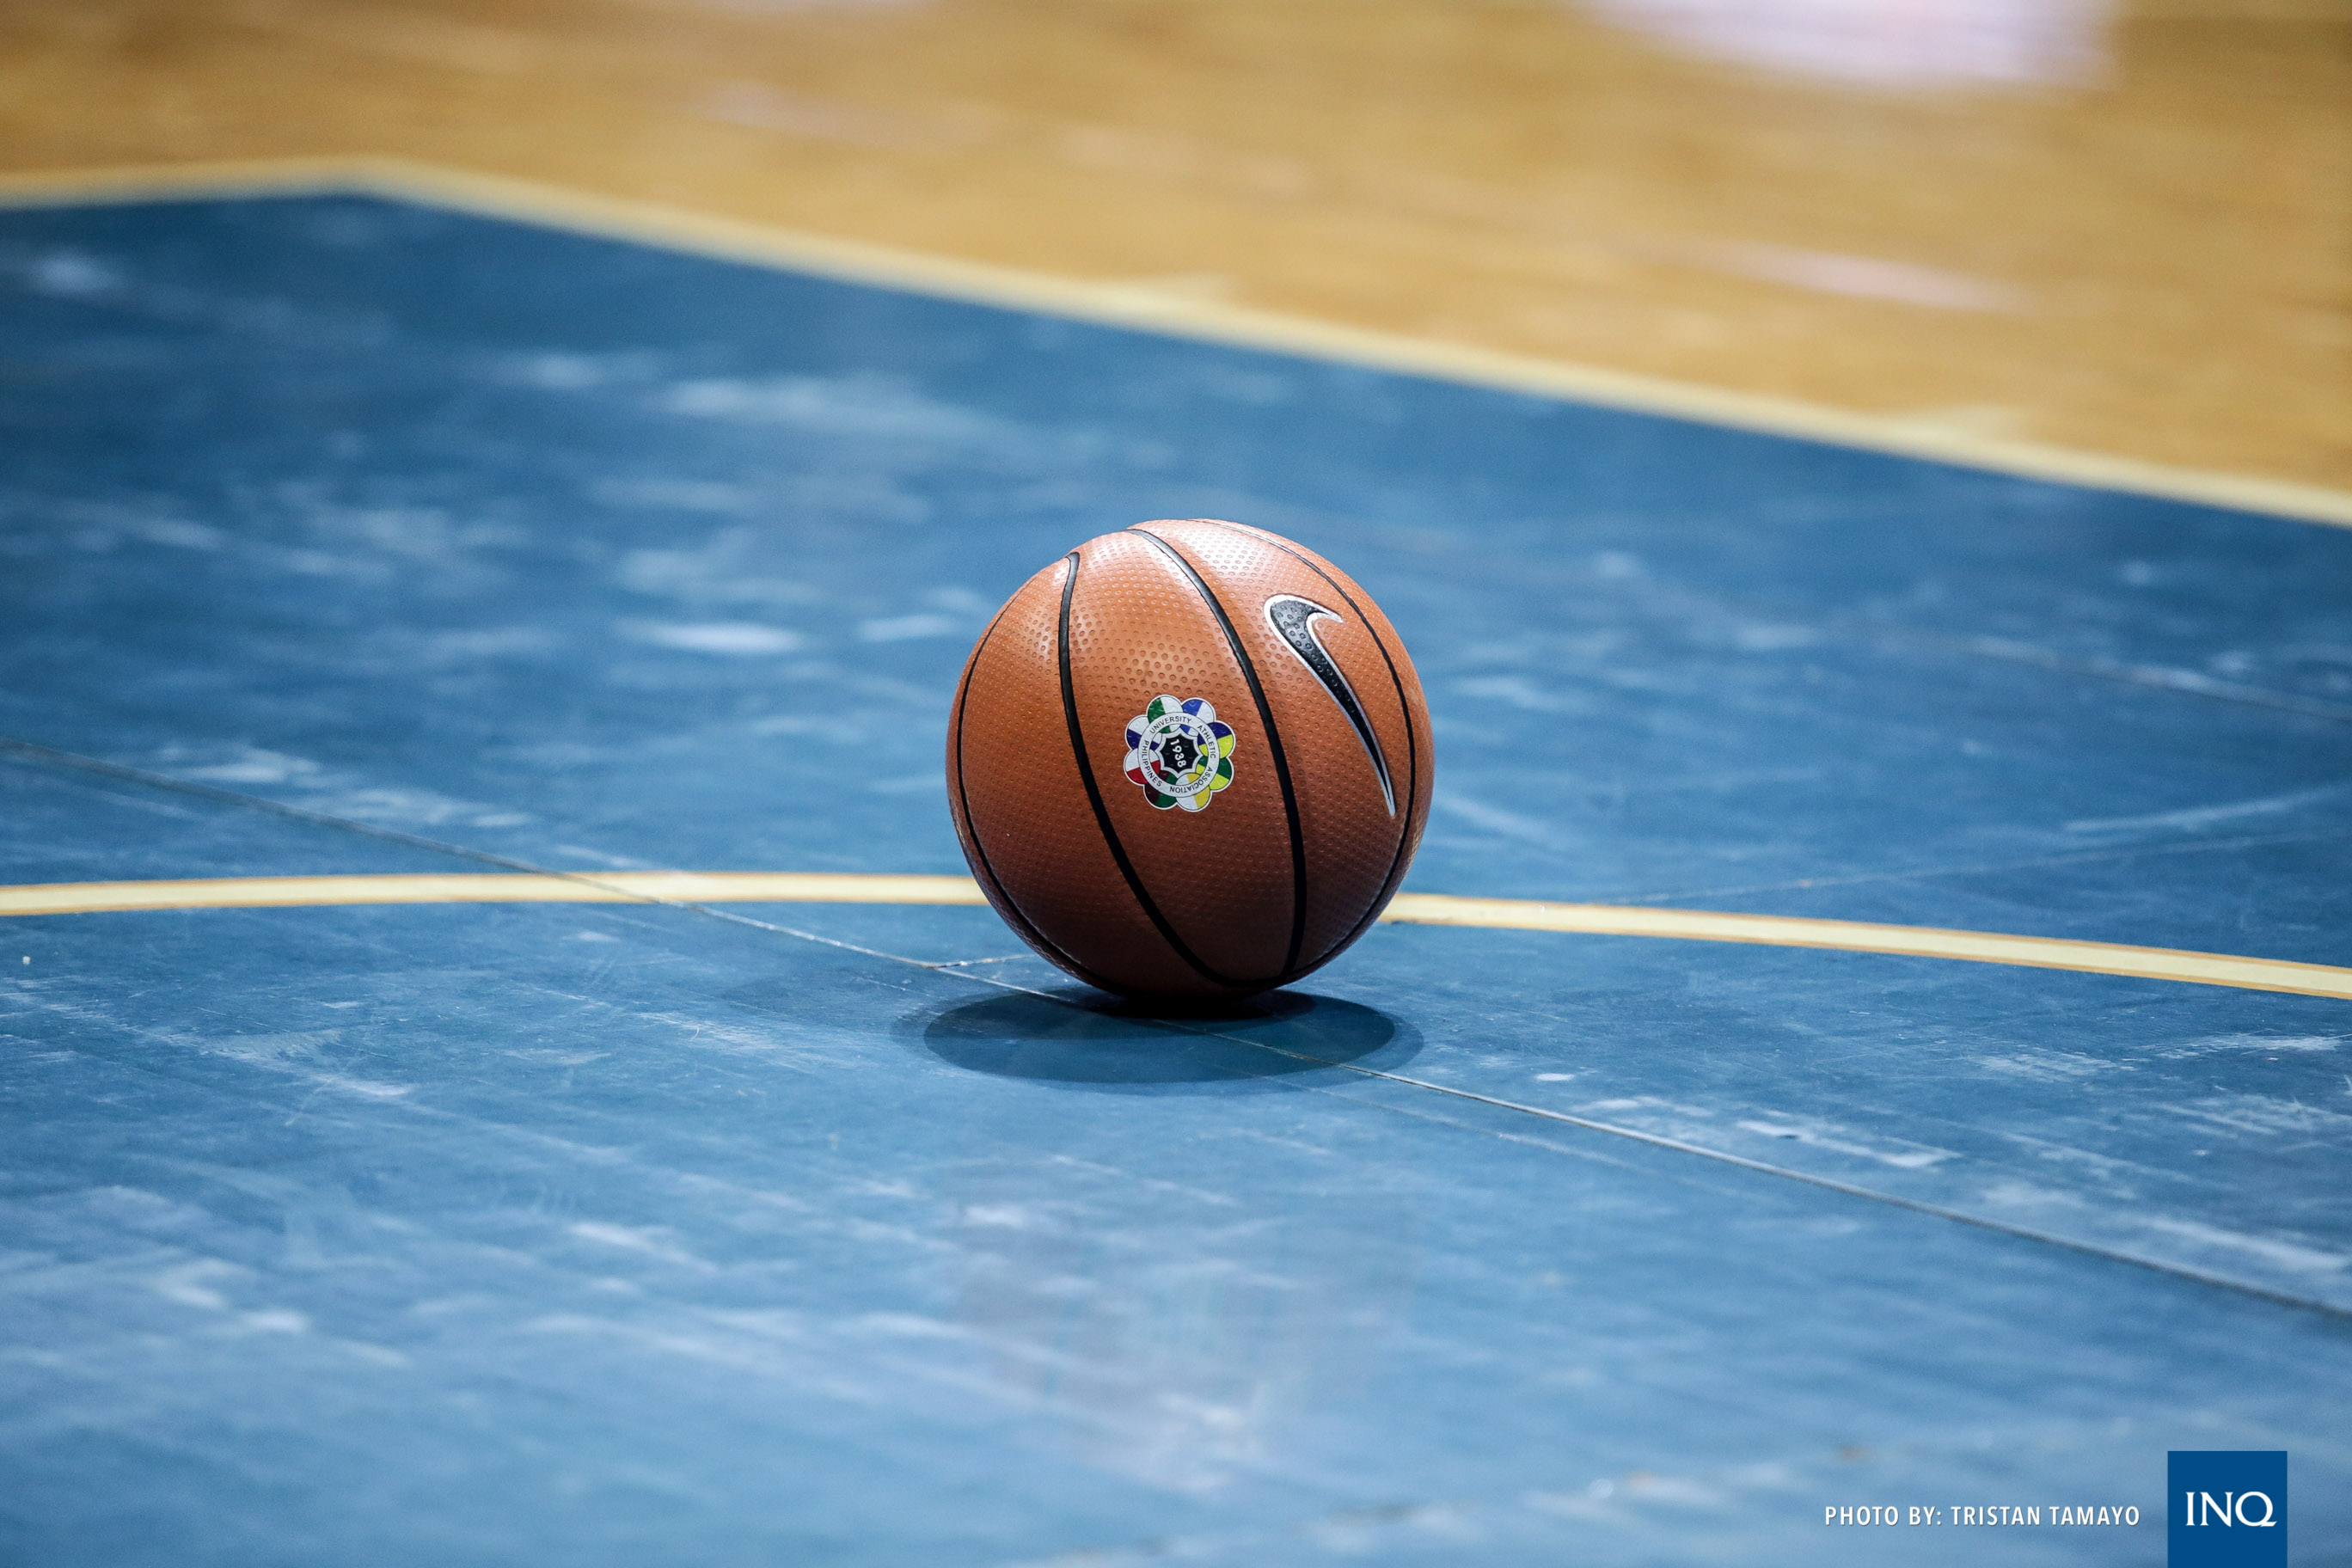 UAAP finally resumes in March.